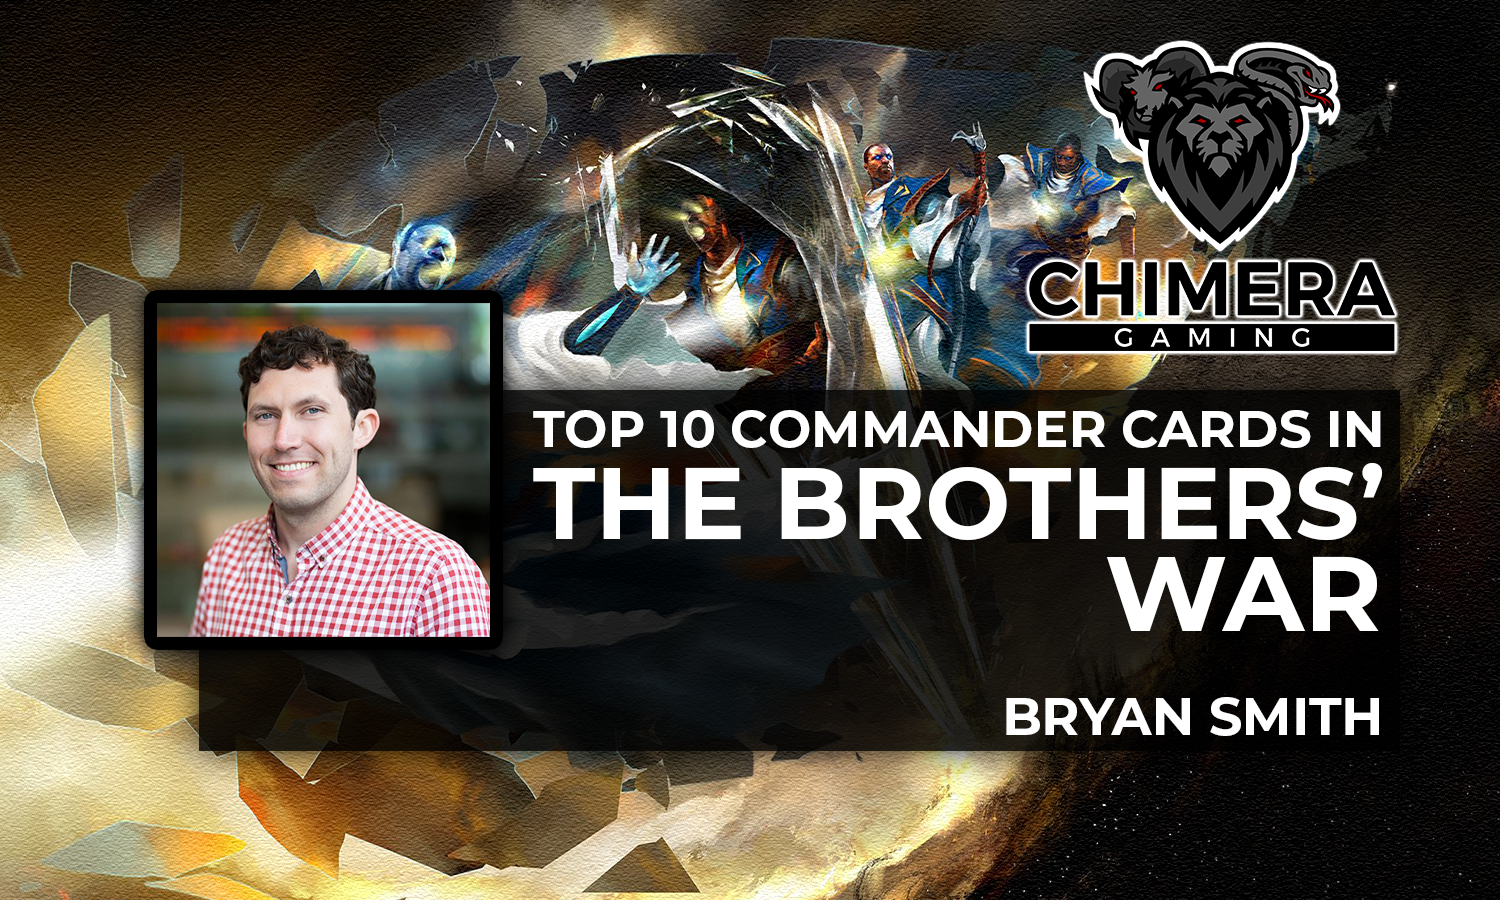 Top 10 Commander Cards In The Brothers' War